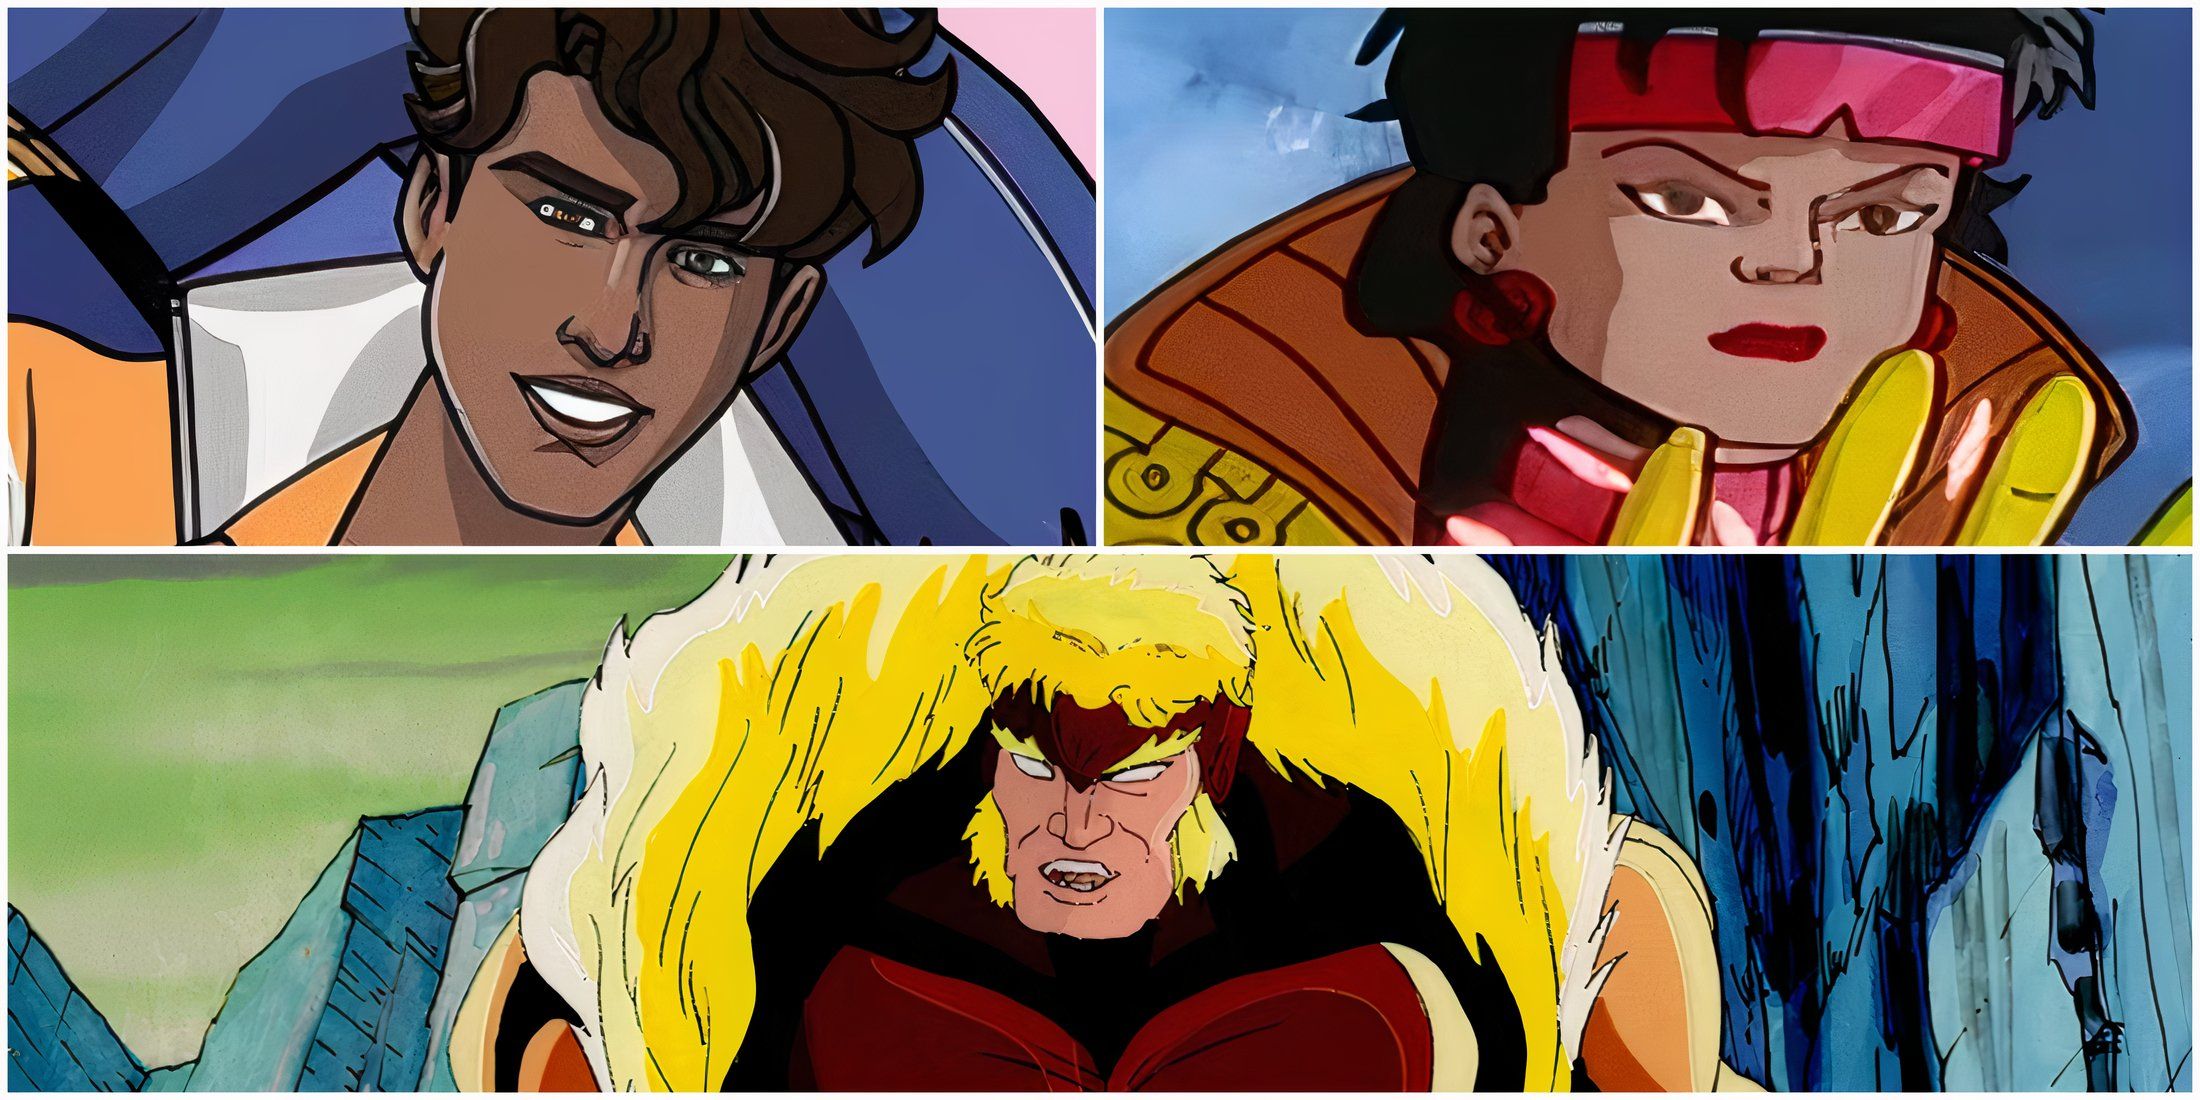 A split image of characters from X-Men The Animated Series